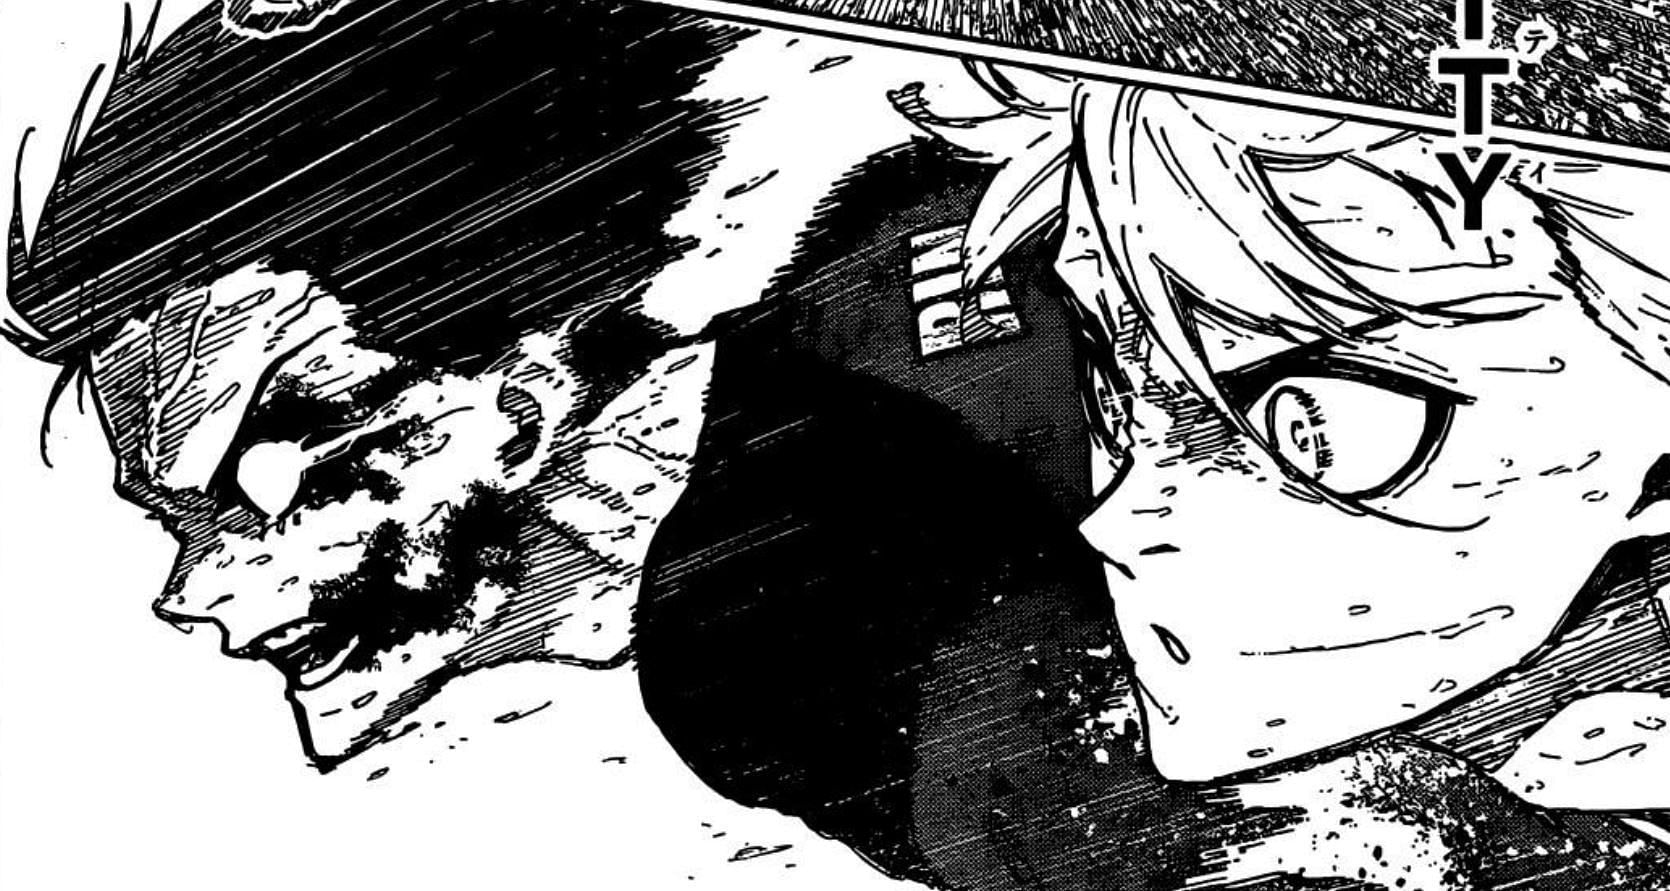 Blue Lock chapter 239: Exact release date and time, where to read, and more